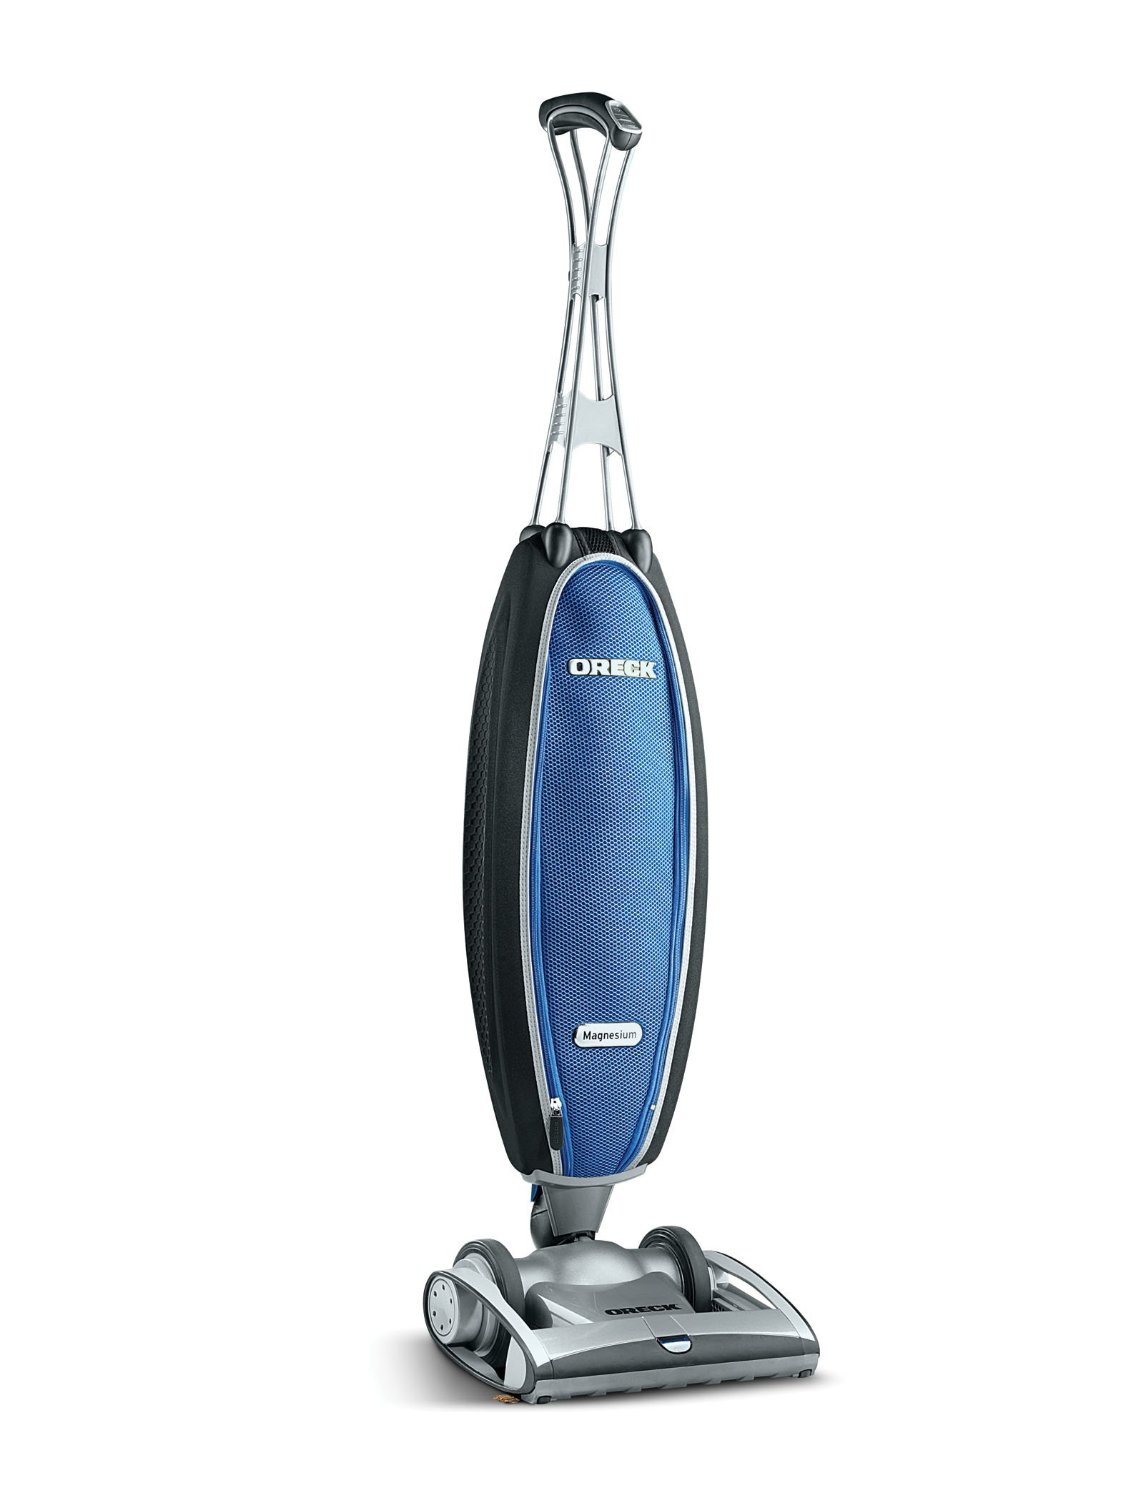 Compare Vacuum Cleaners: Bag vs. Bagless, Upright vs. Canister